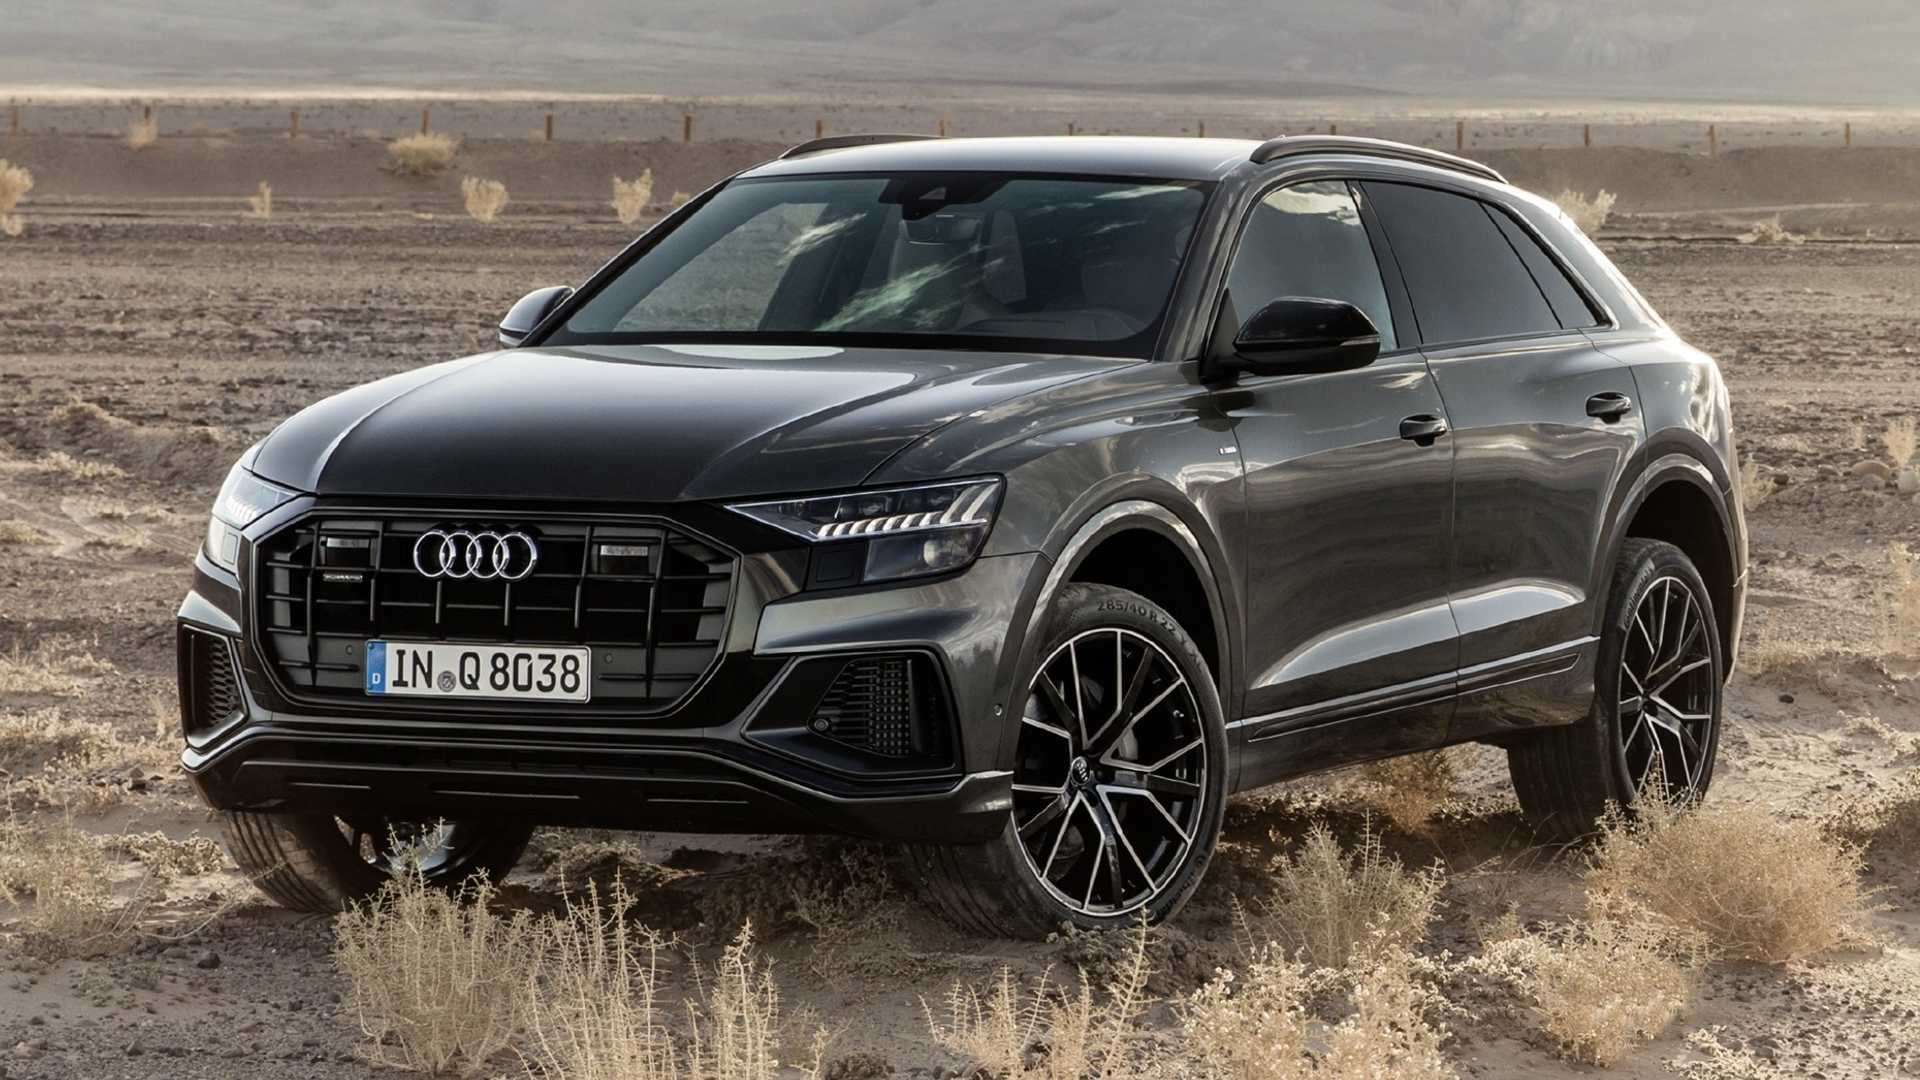 Audi Q8 News and Reviews